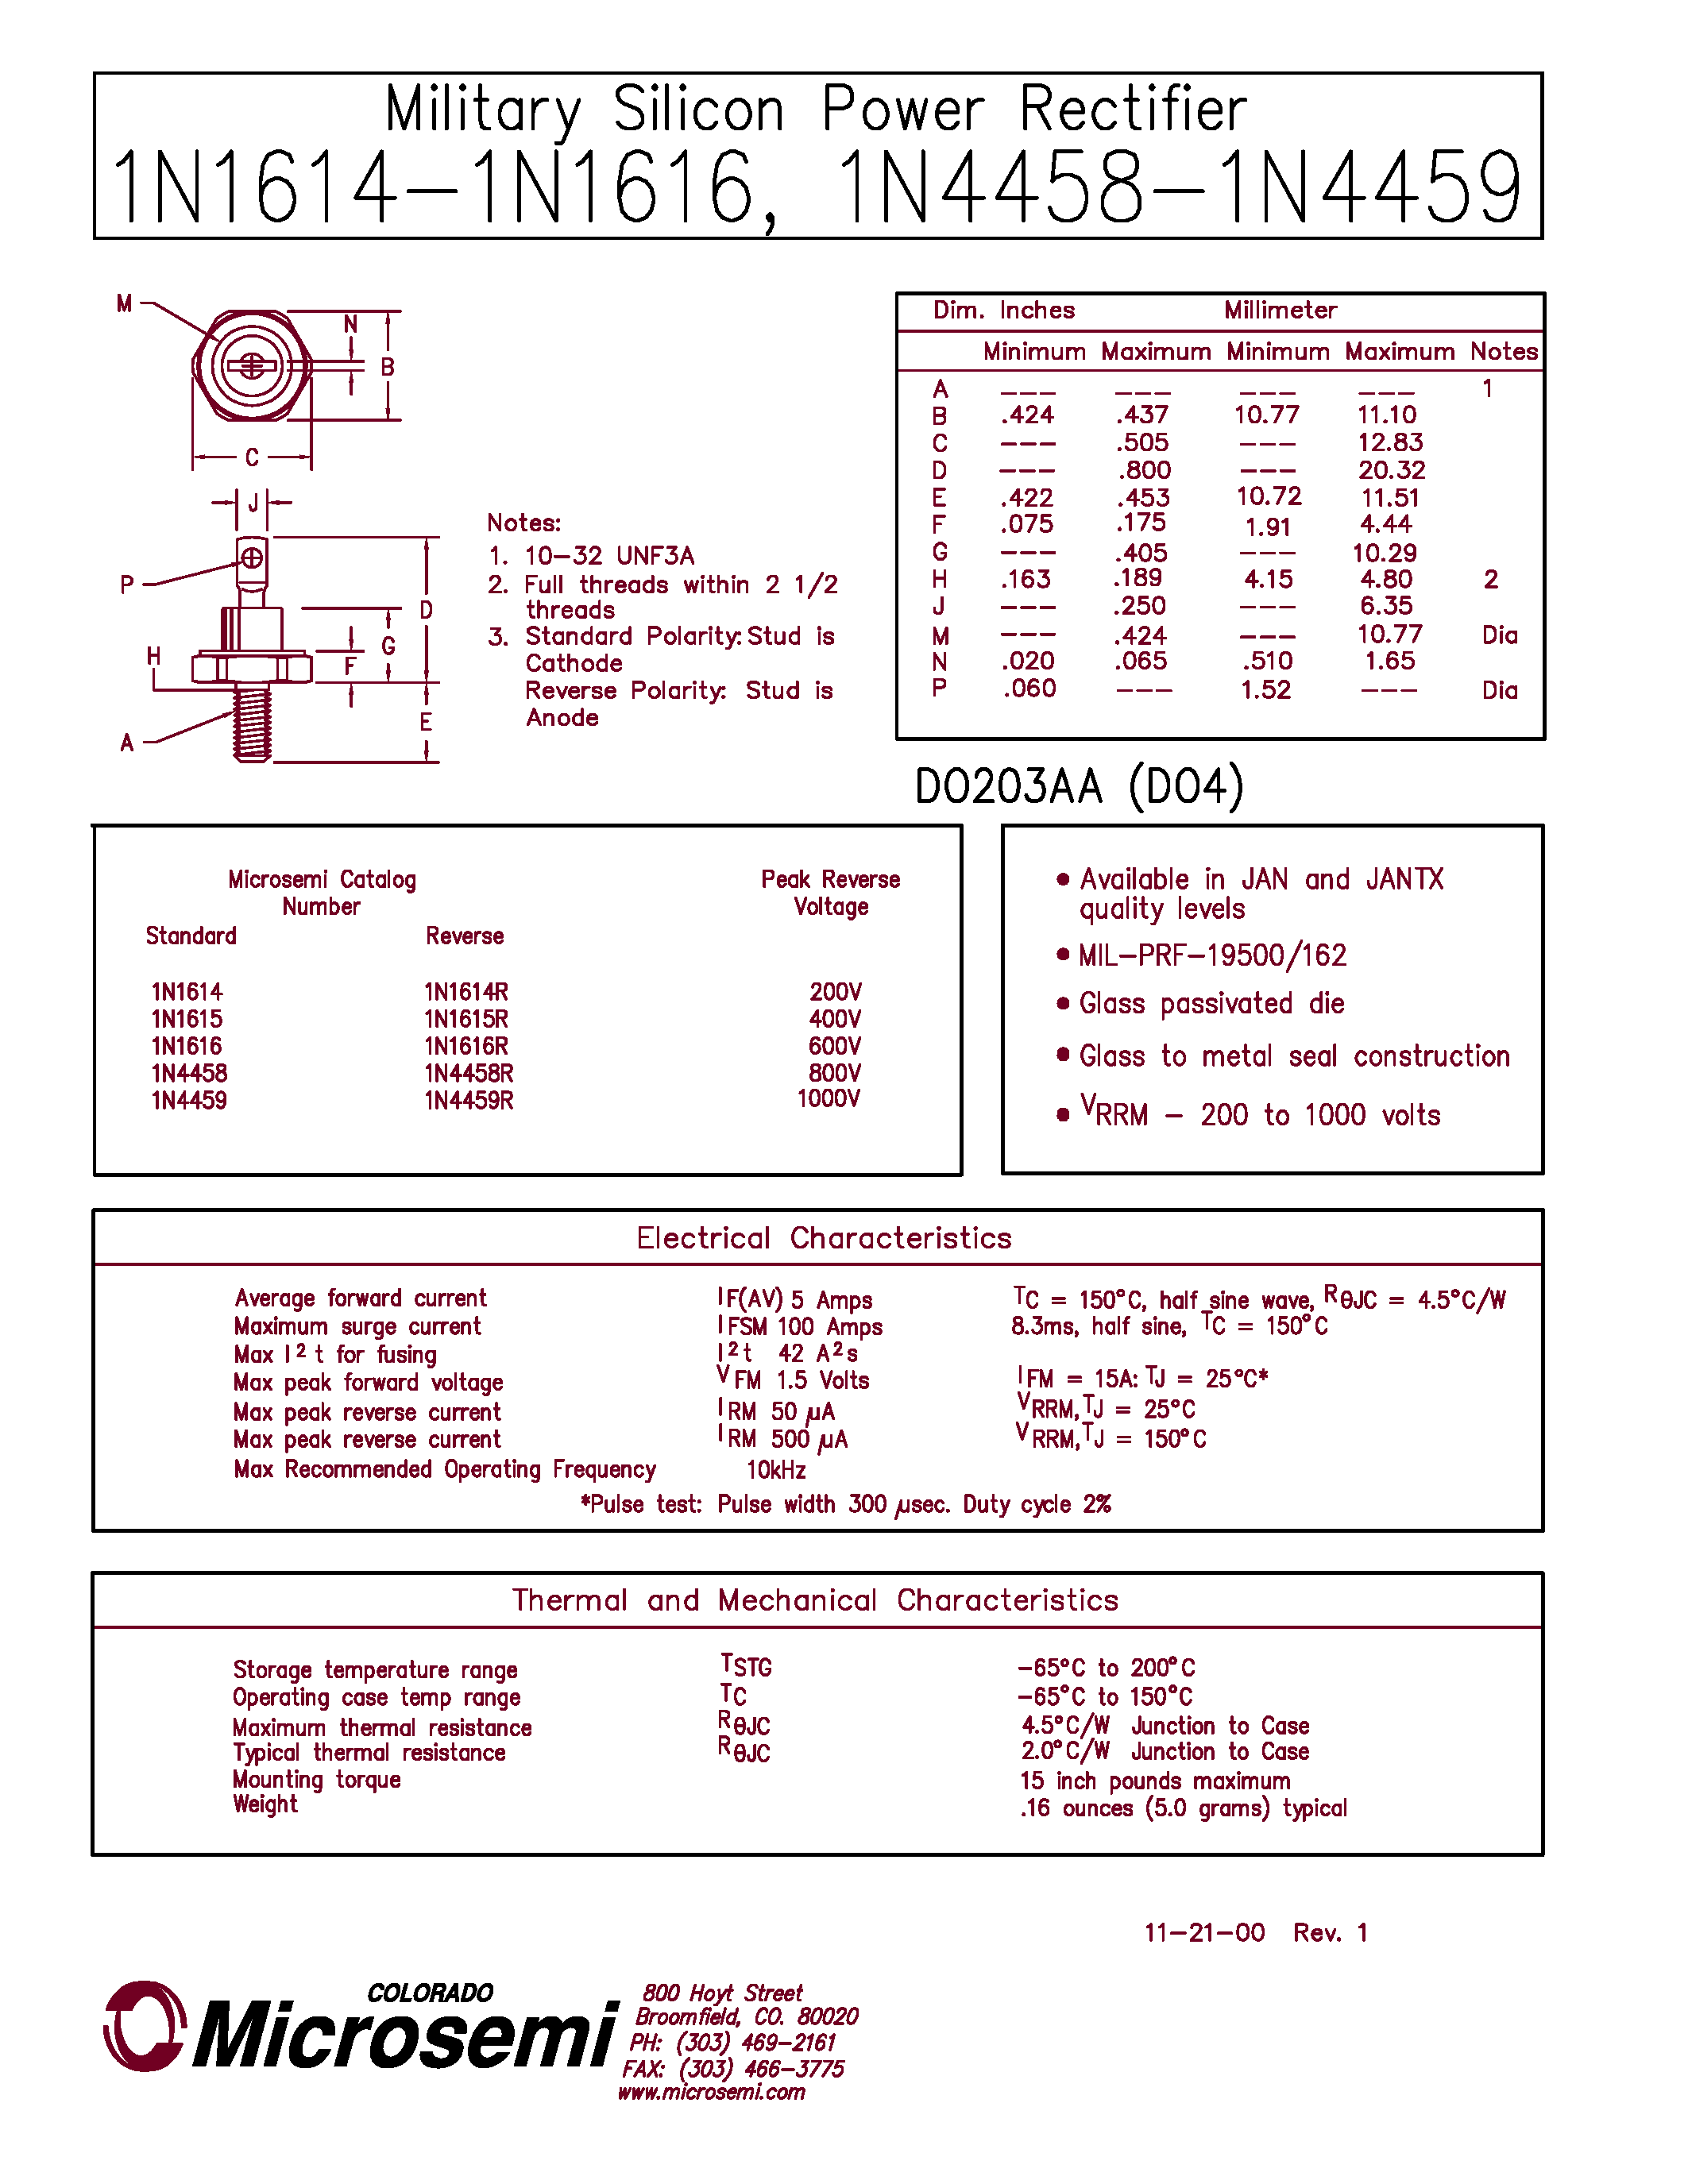 Datasheet 1N1614 - Military Silicon Power Rectifier page 1